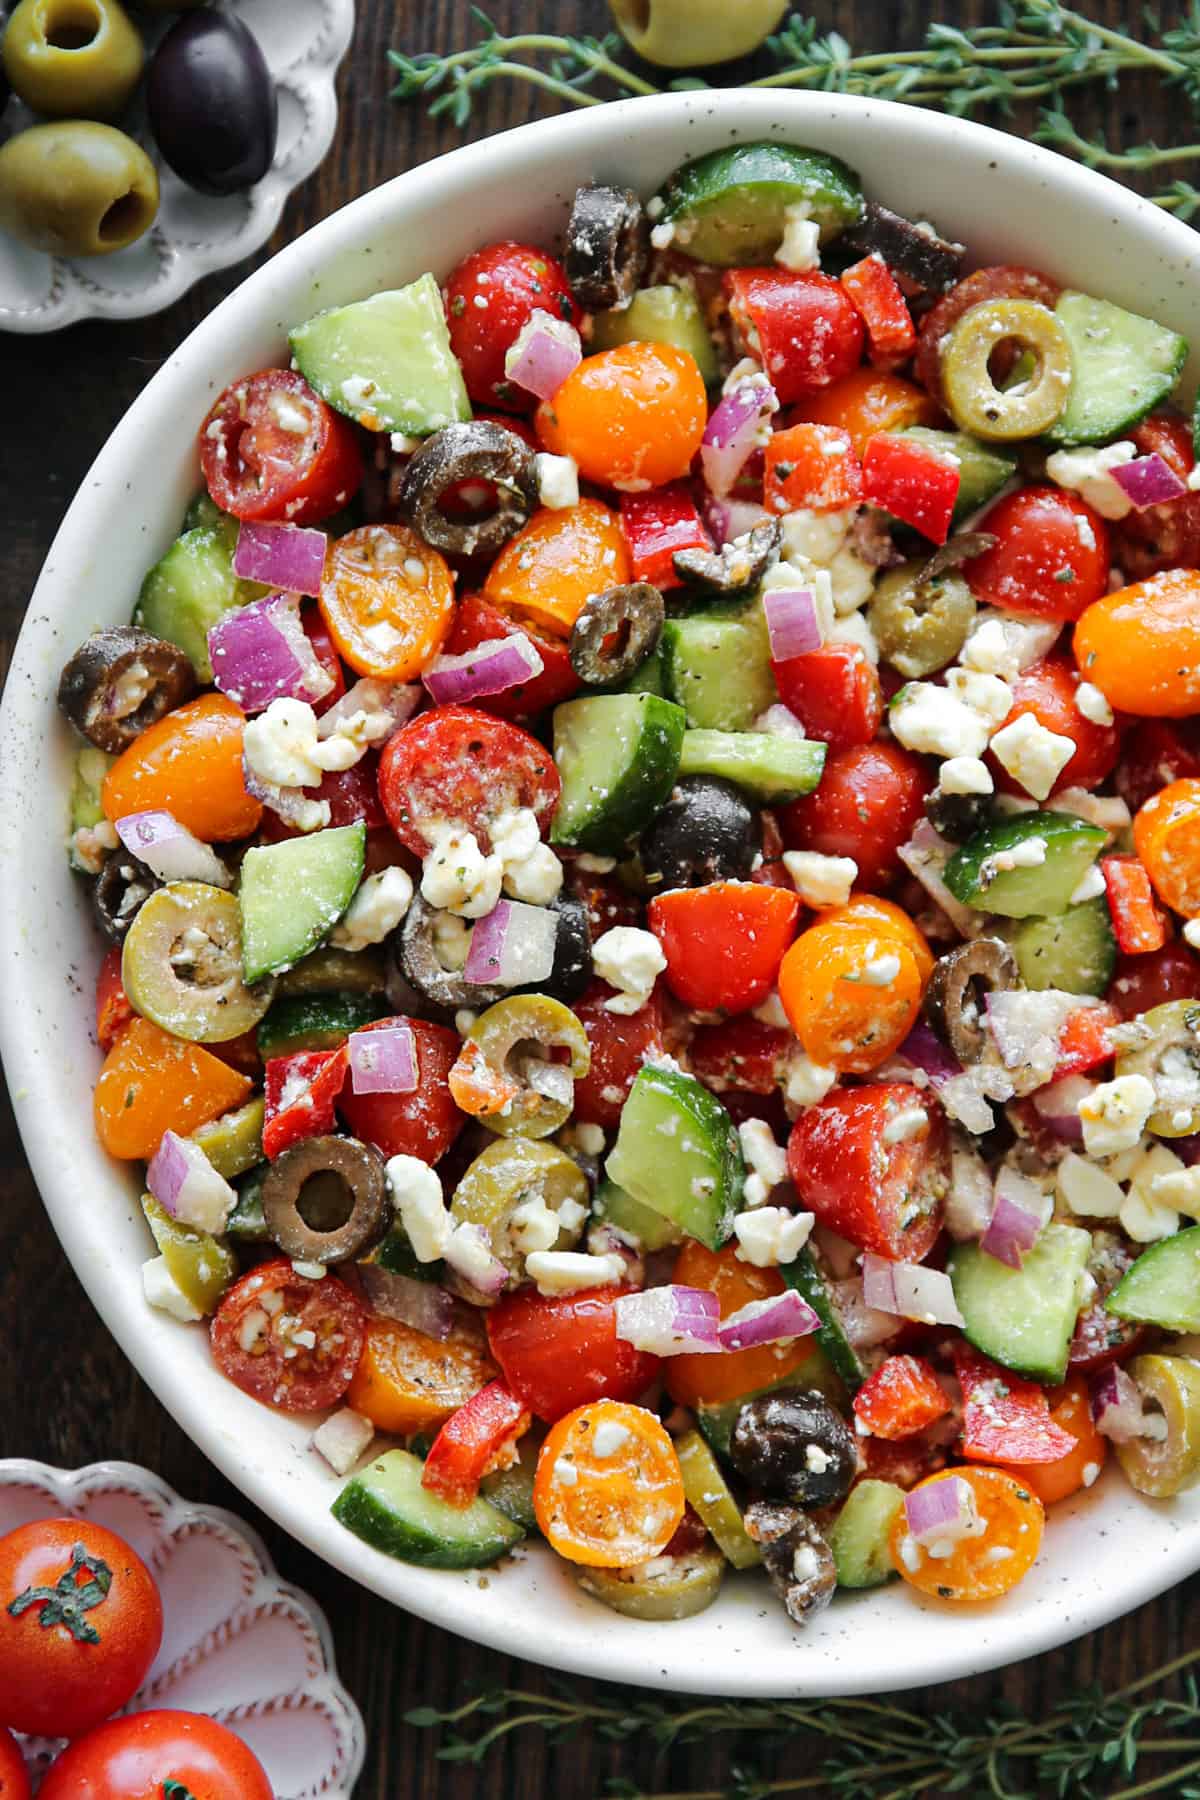 Greek salad with grape tomatoes, cucumber, bell pepper, olives, red onions, and feta cheese - in a white bowl.